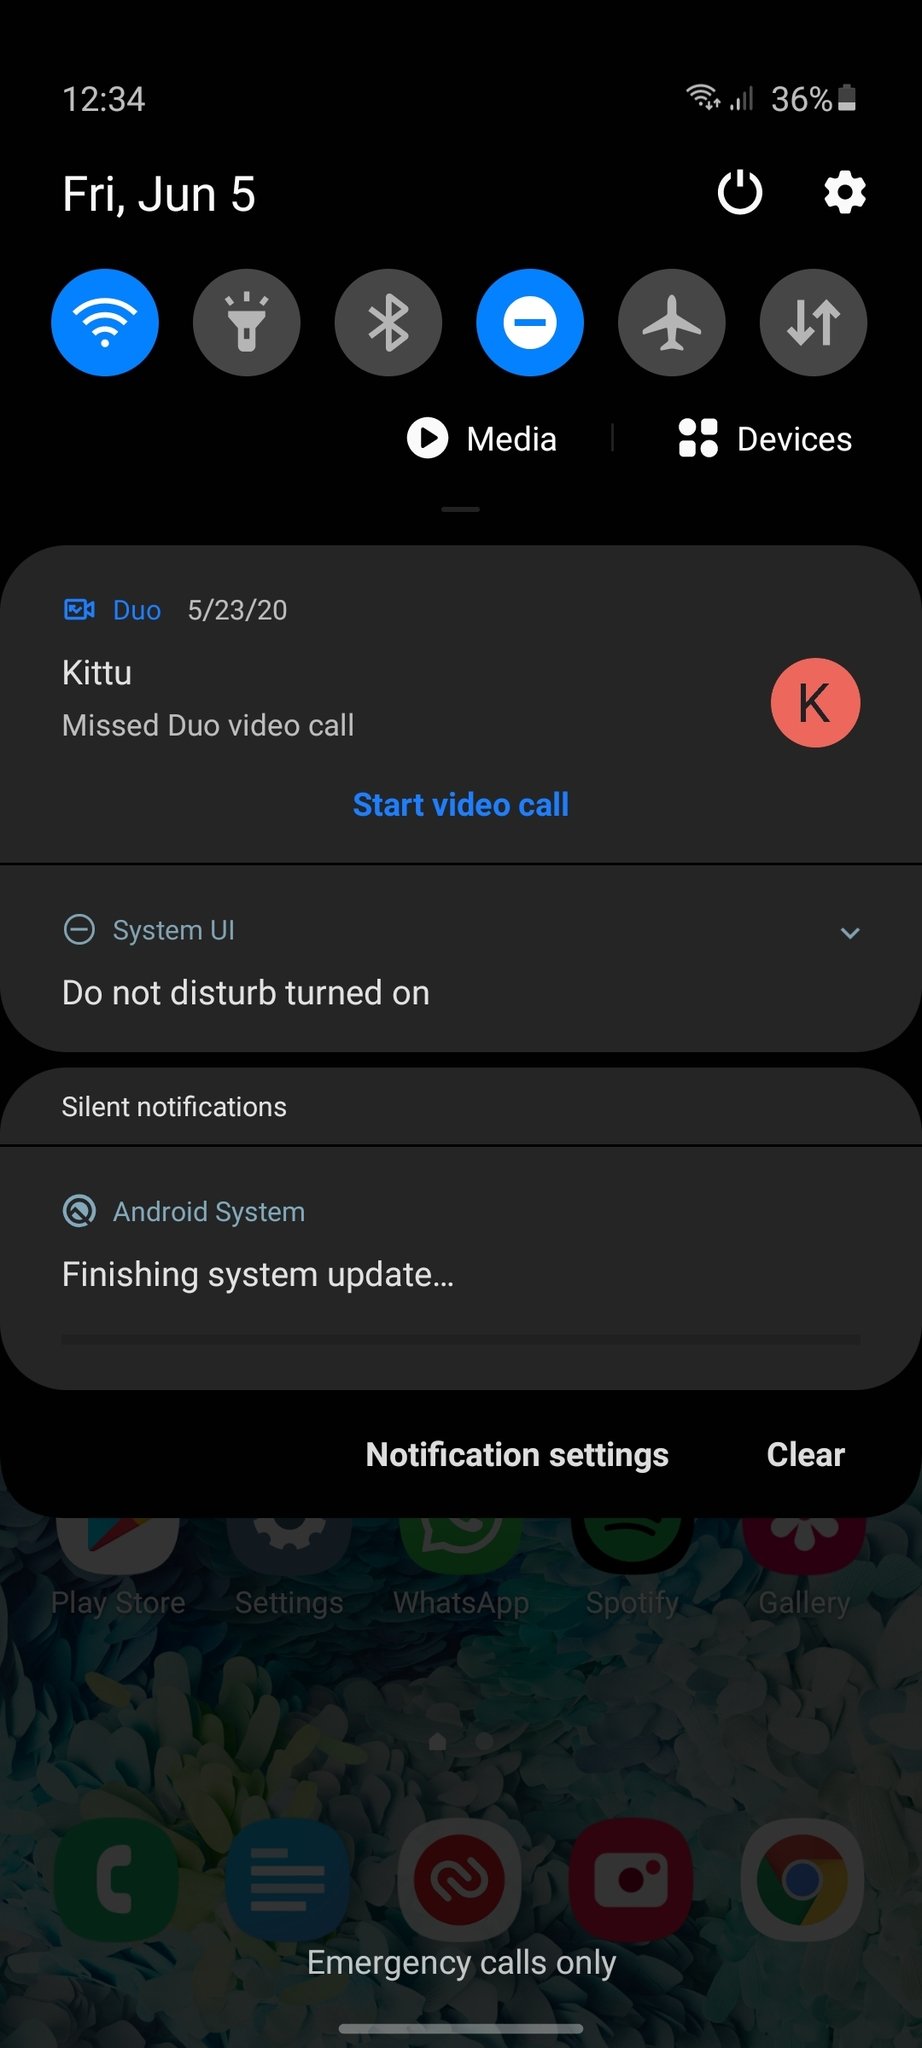 Samsung One UI 2.0 overview